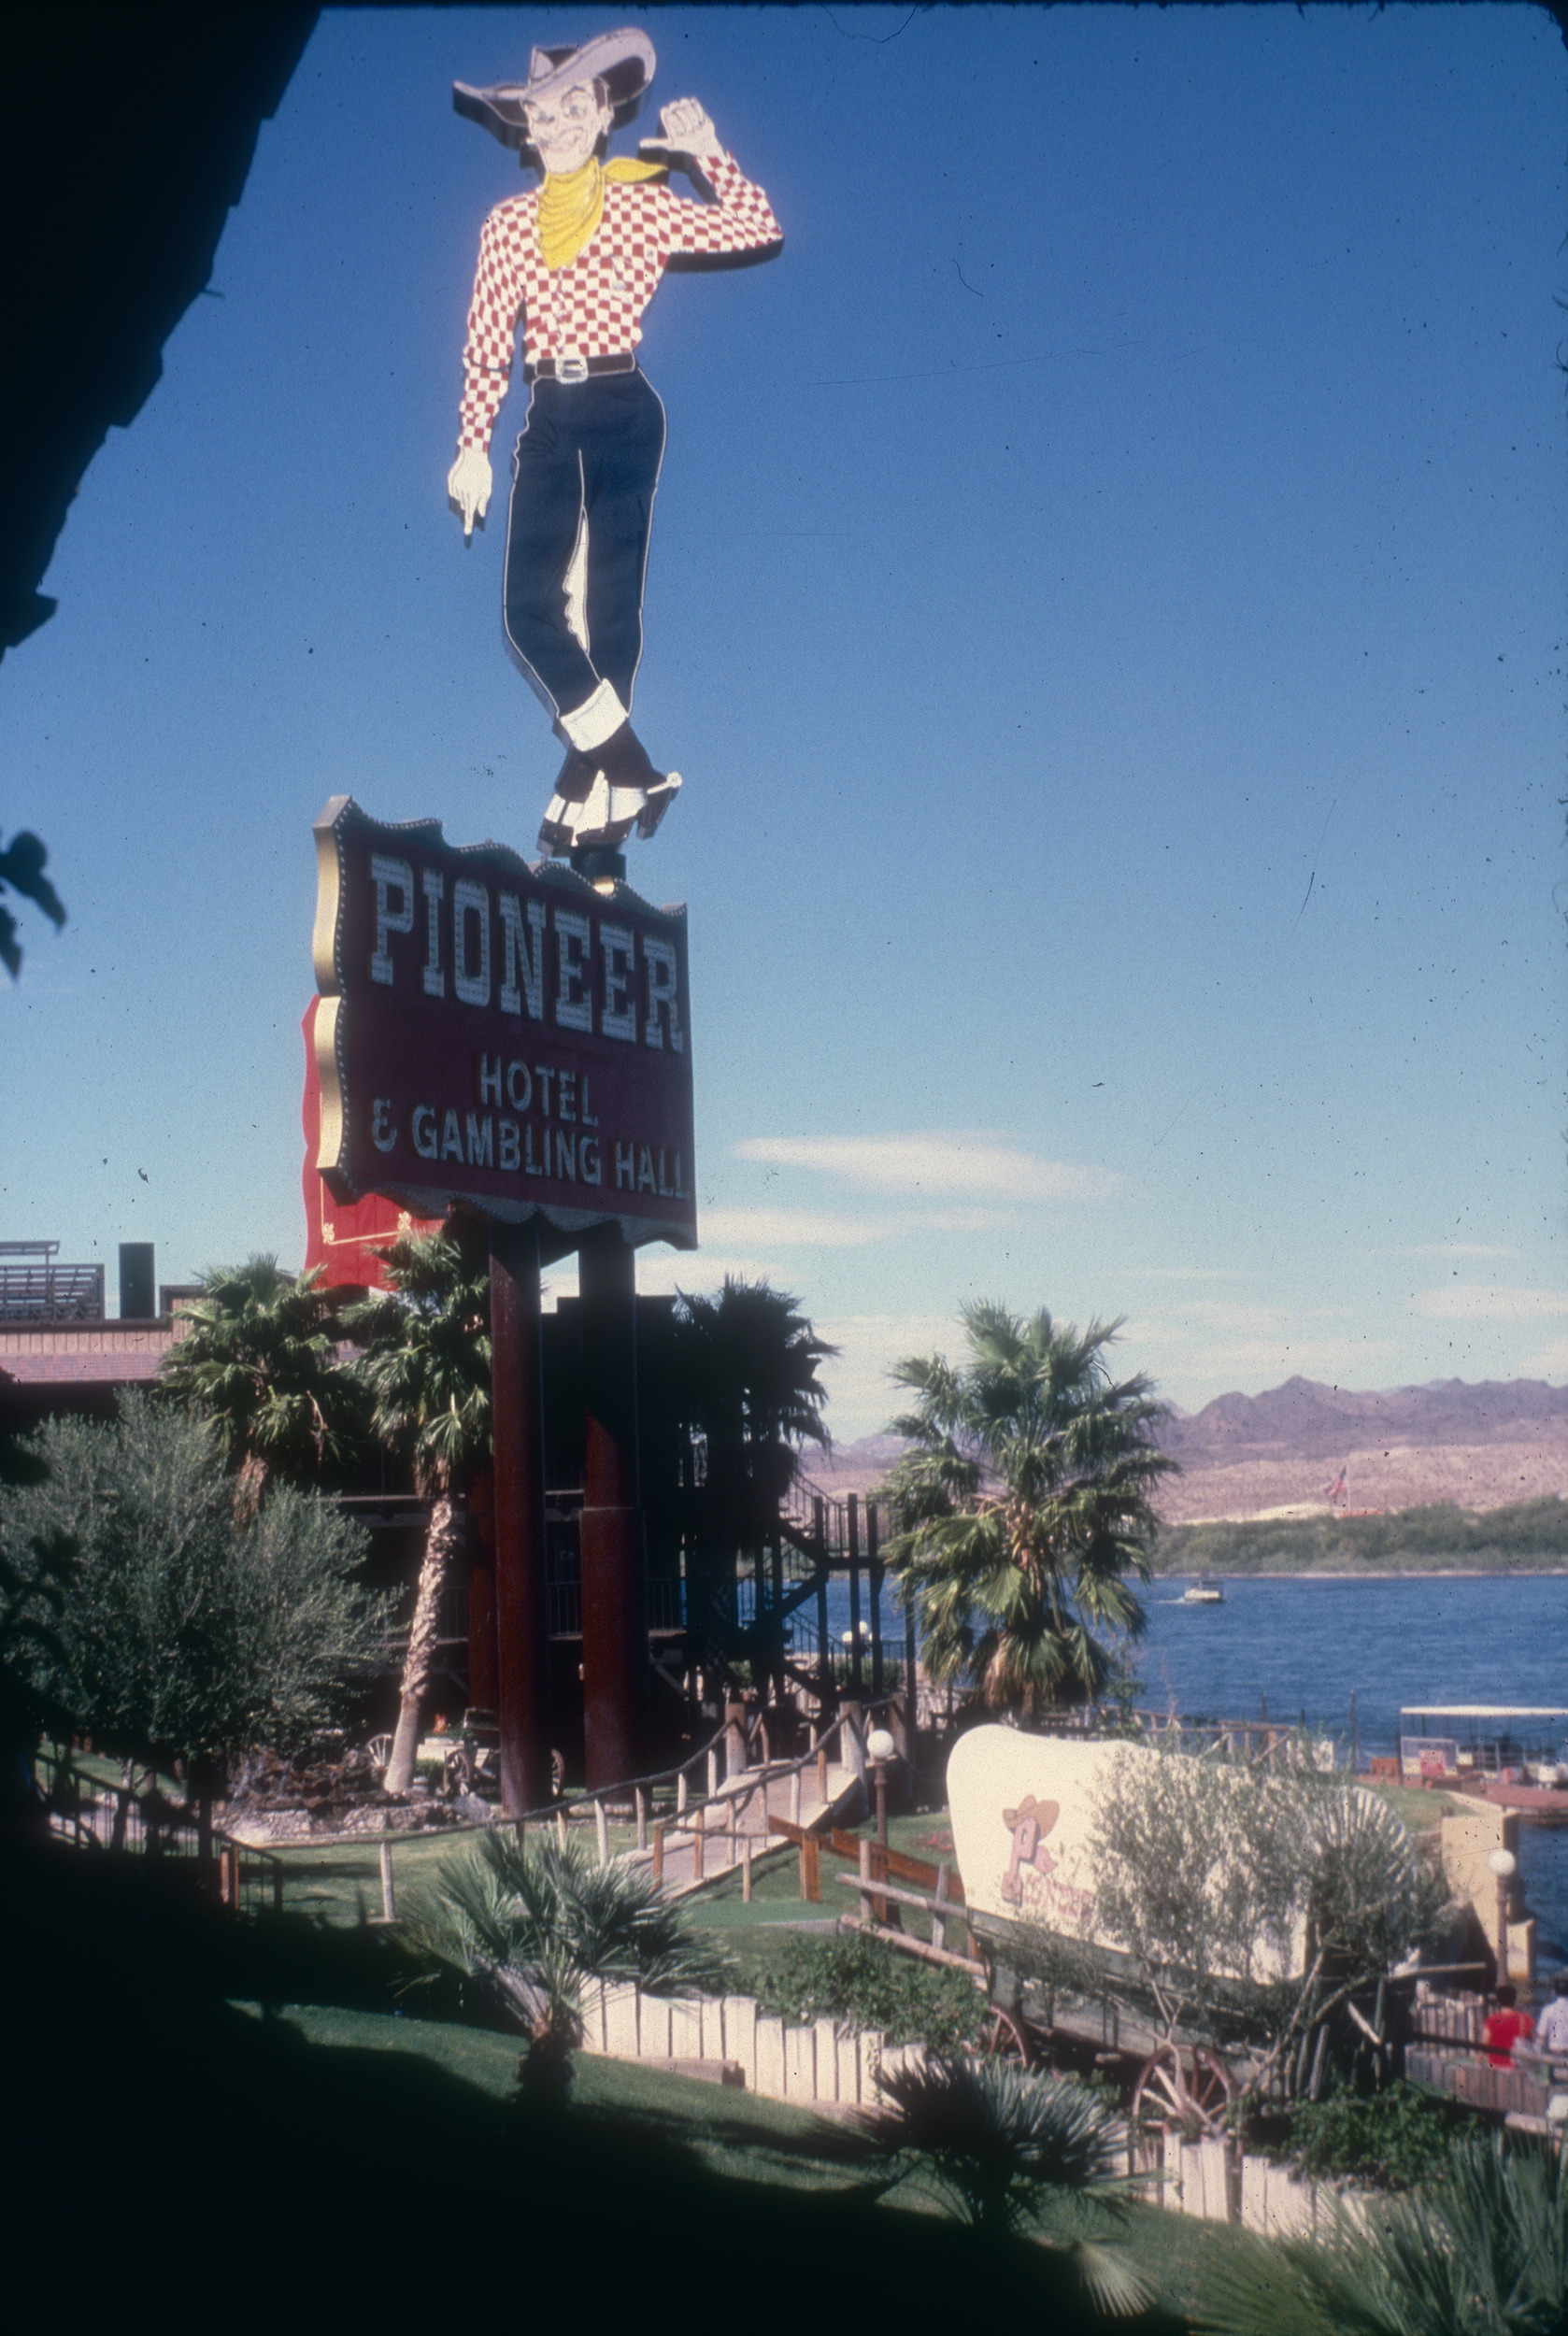 Slide of the cowboy neon sign at the Pioneer Hotel and Gambling Hall, Laughlin, Nevada, 1986